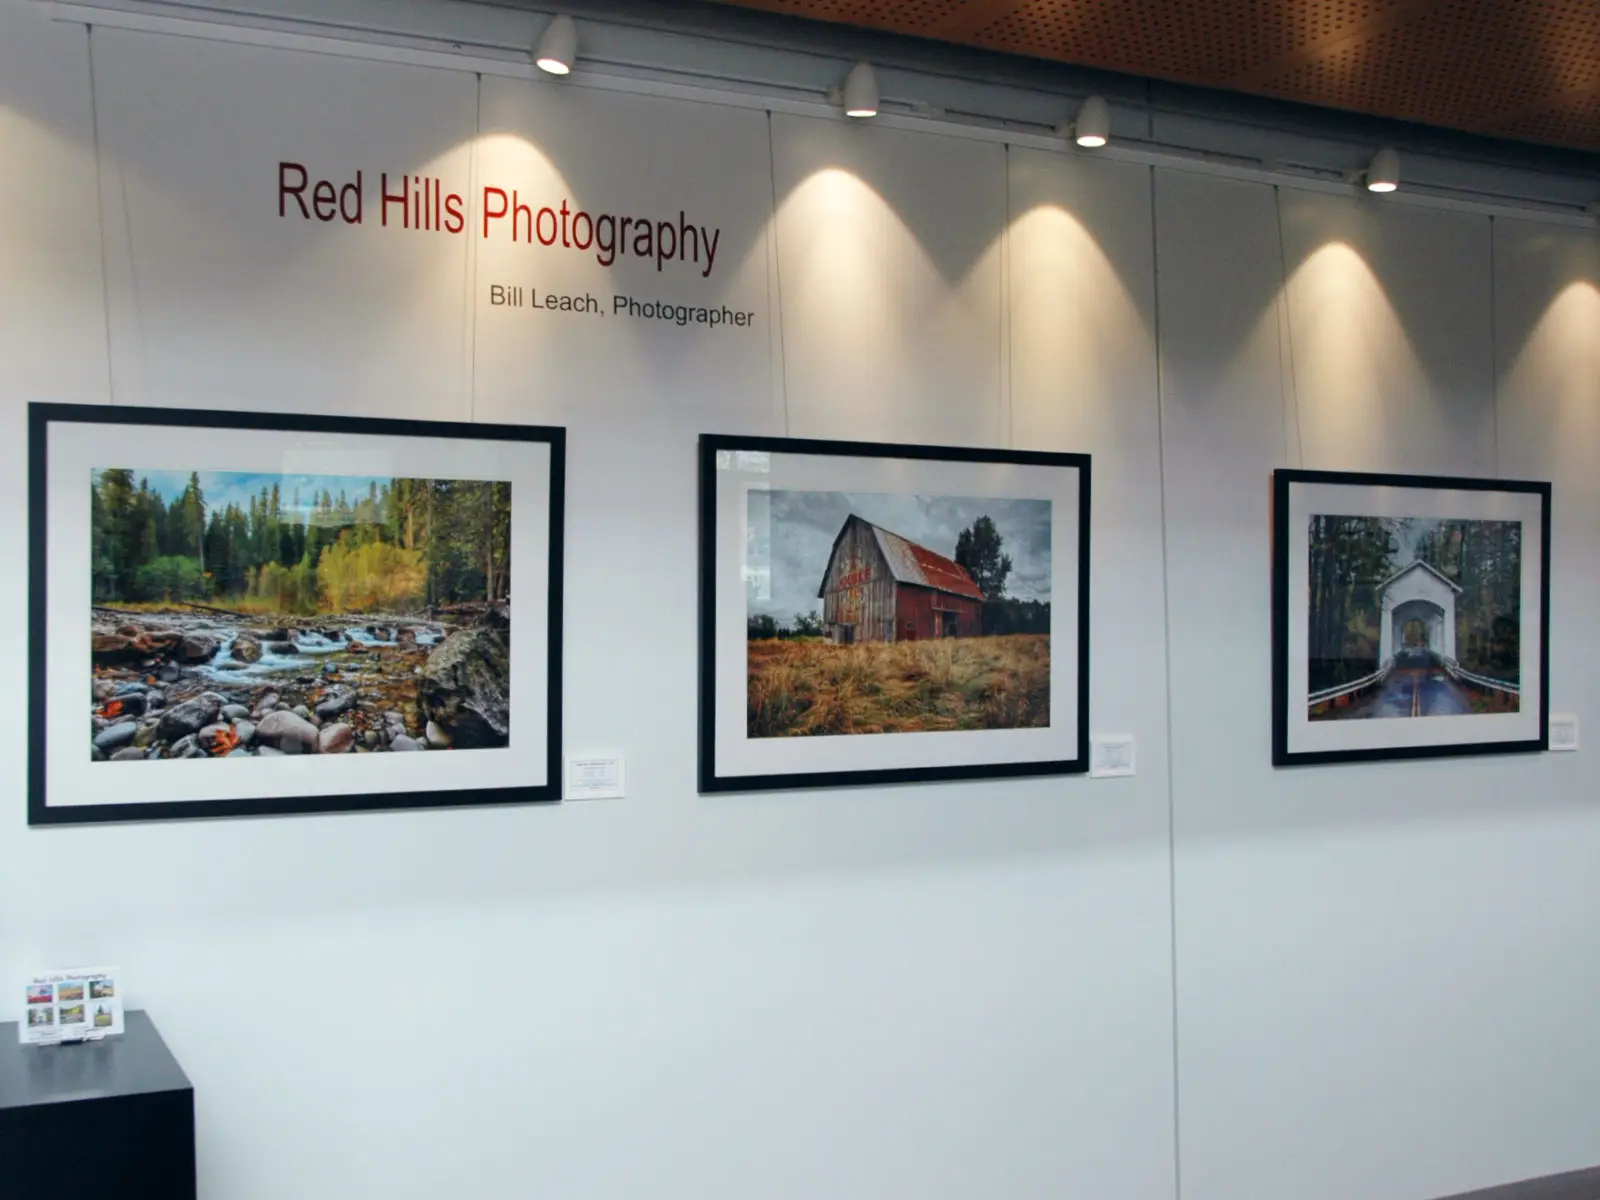 A set of photos from Red Hills Photography in the commons gallery of the Wilsonville campus